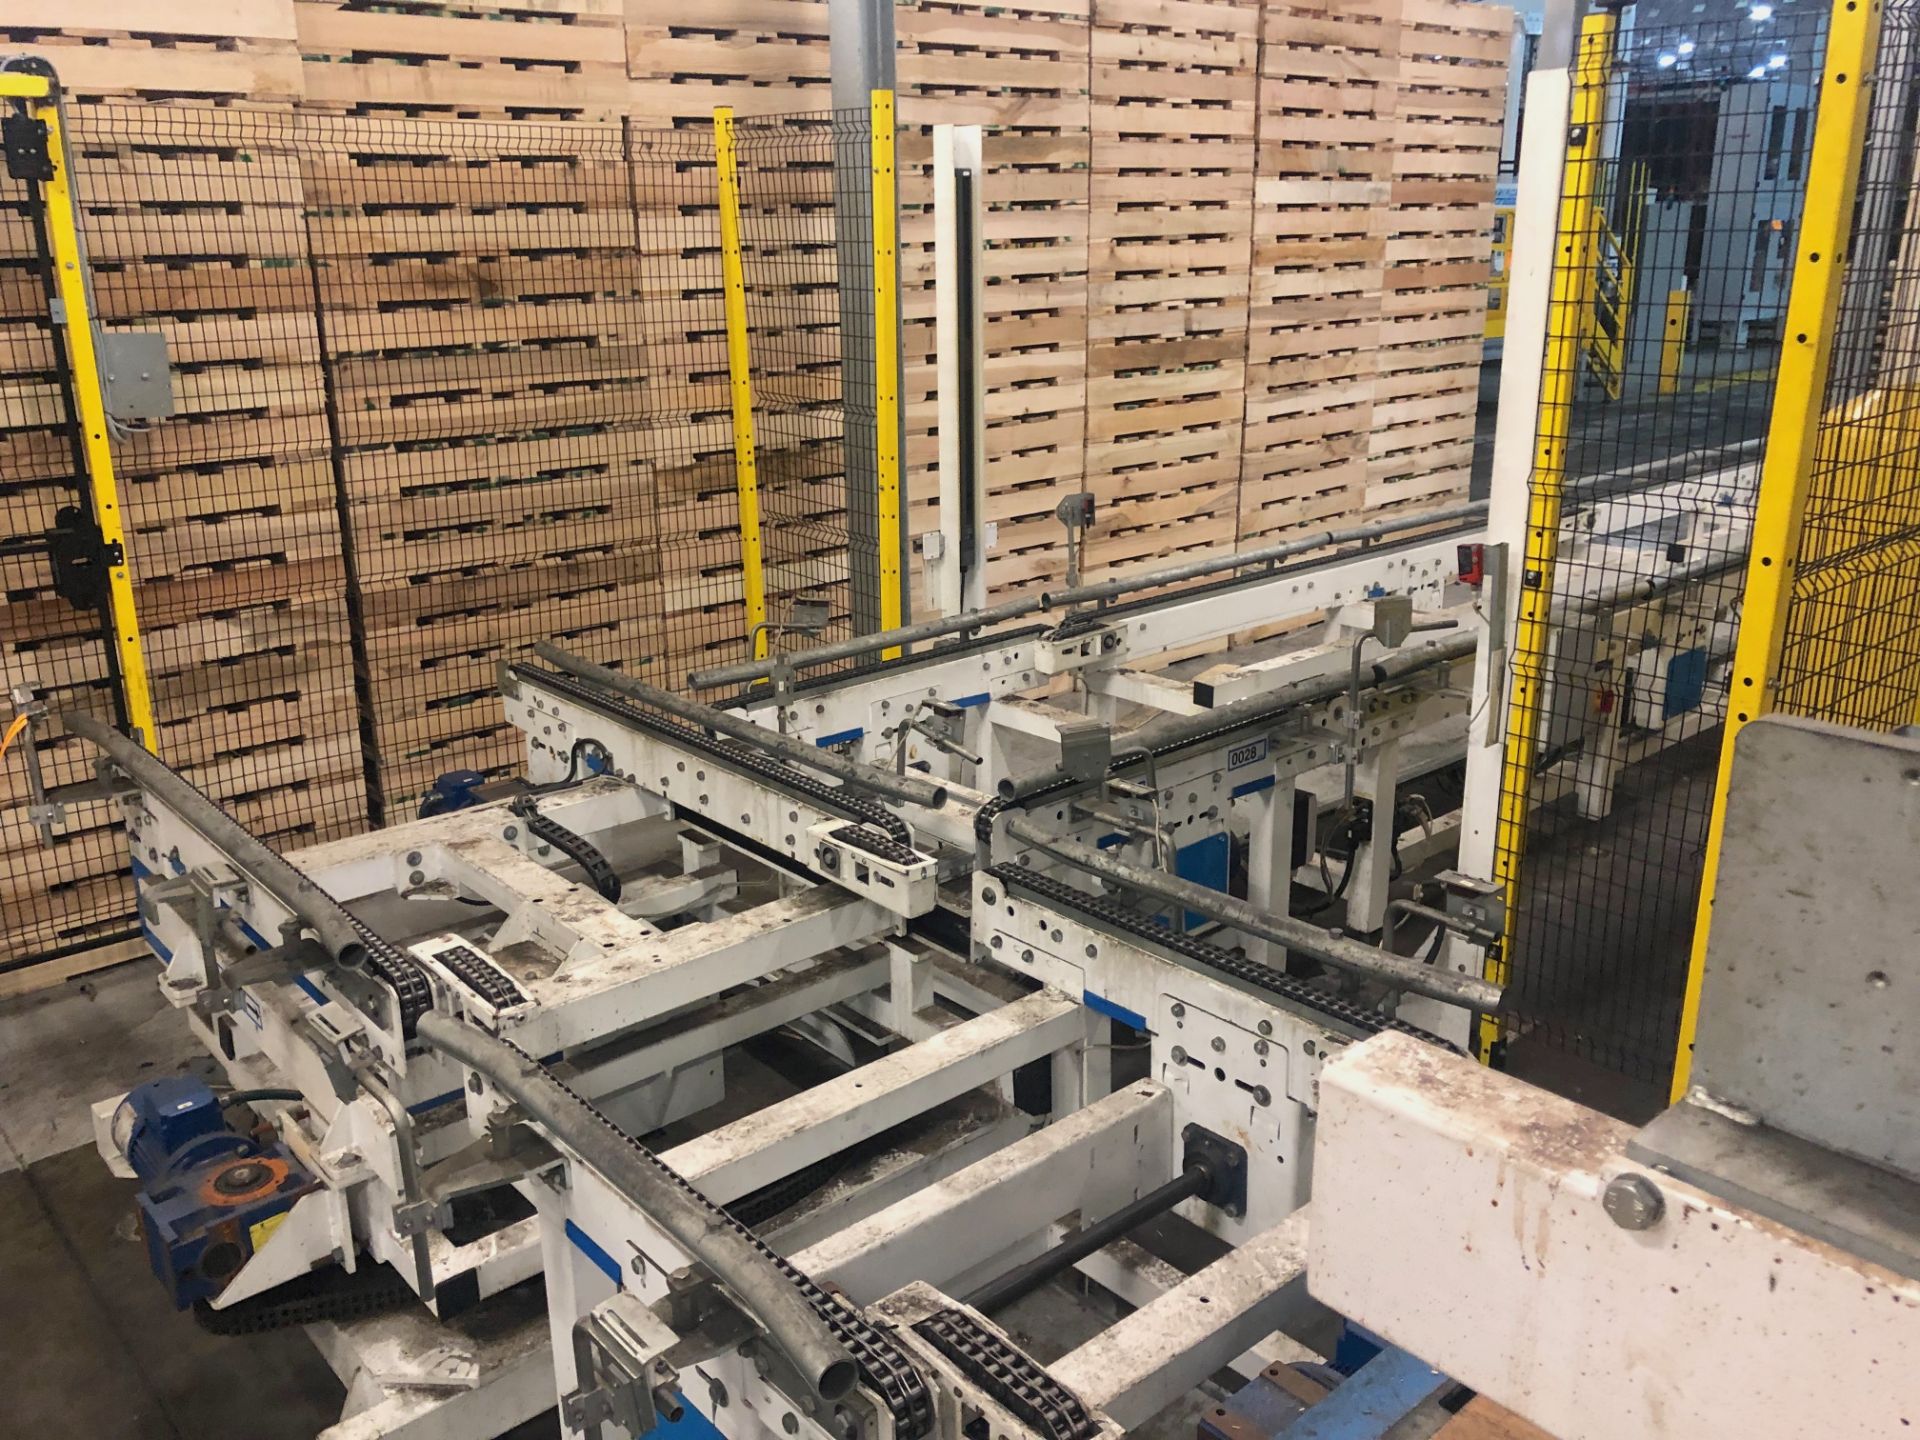 Pallet Dispenser Loading Area (to Feed Pallets to Robotic Palletizers) - Image 14 of 17